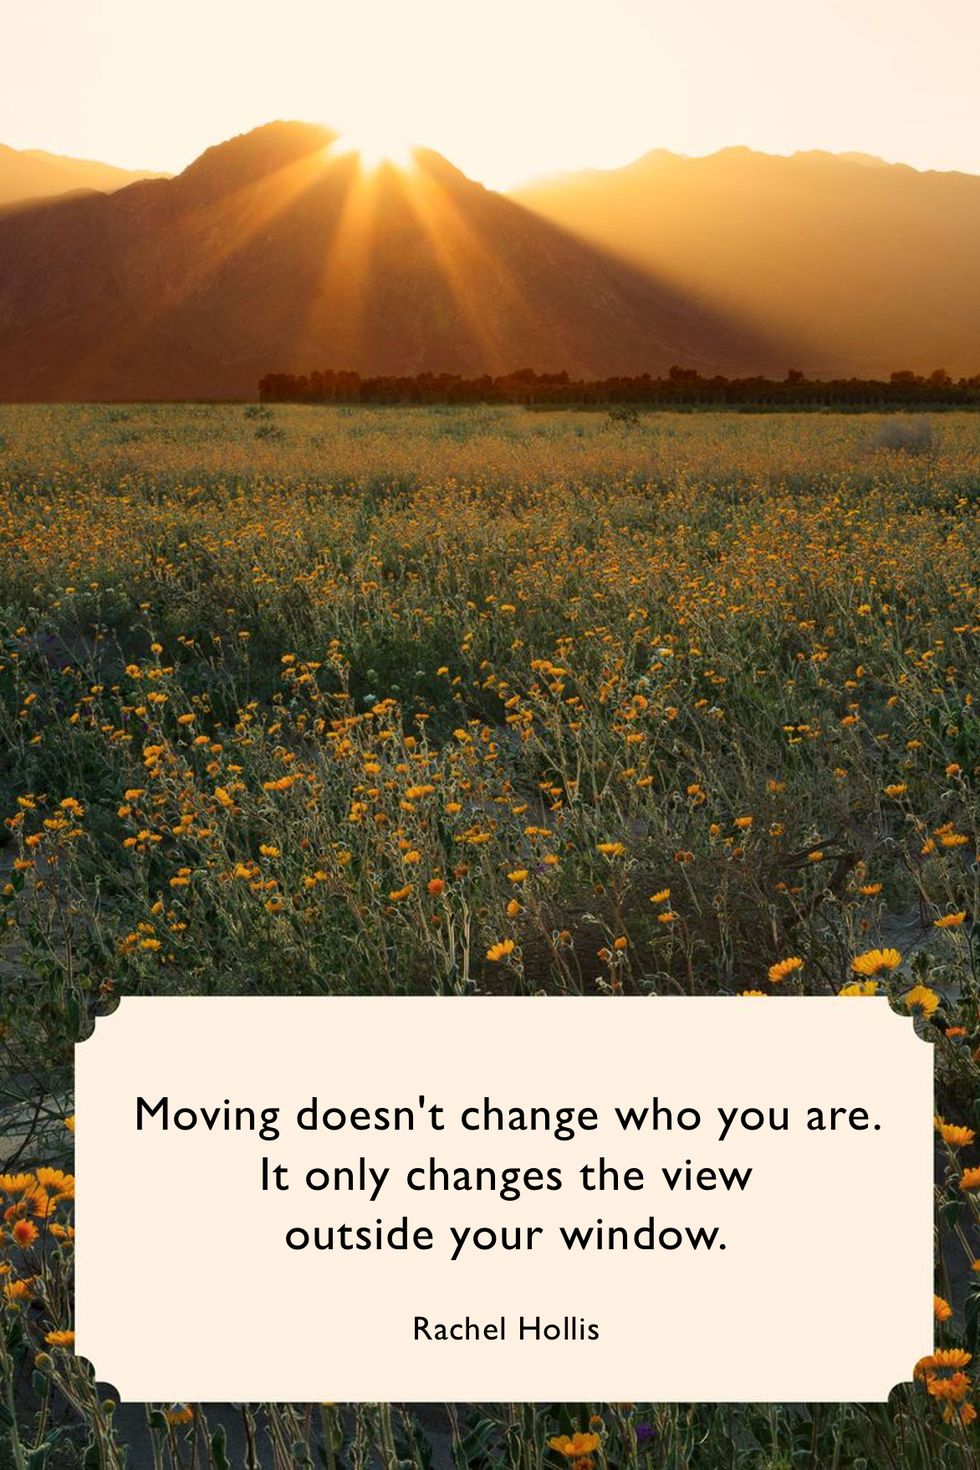 Quotes About Change 4 1580500676 ?crop=1xw 1xh;center,top&resize=980 *